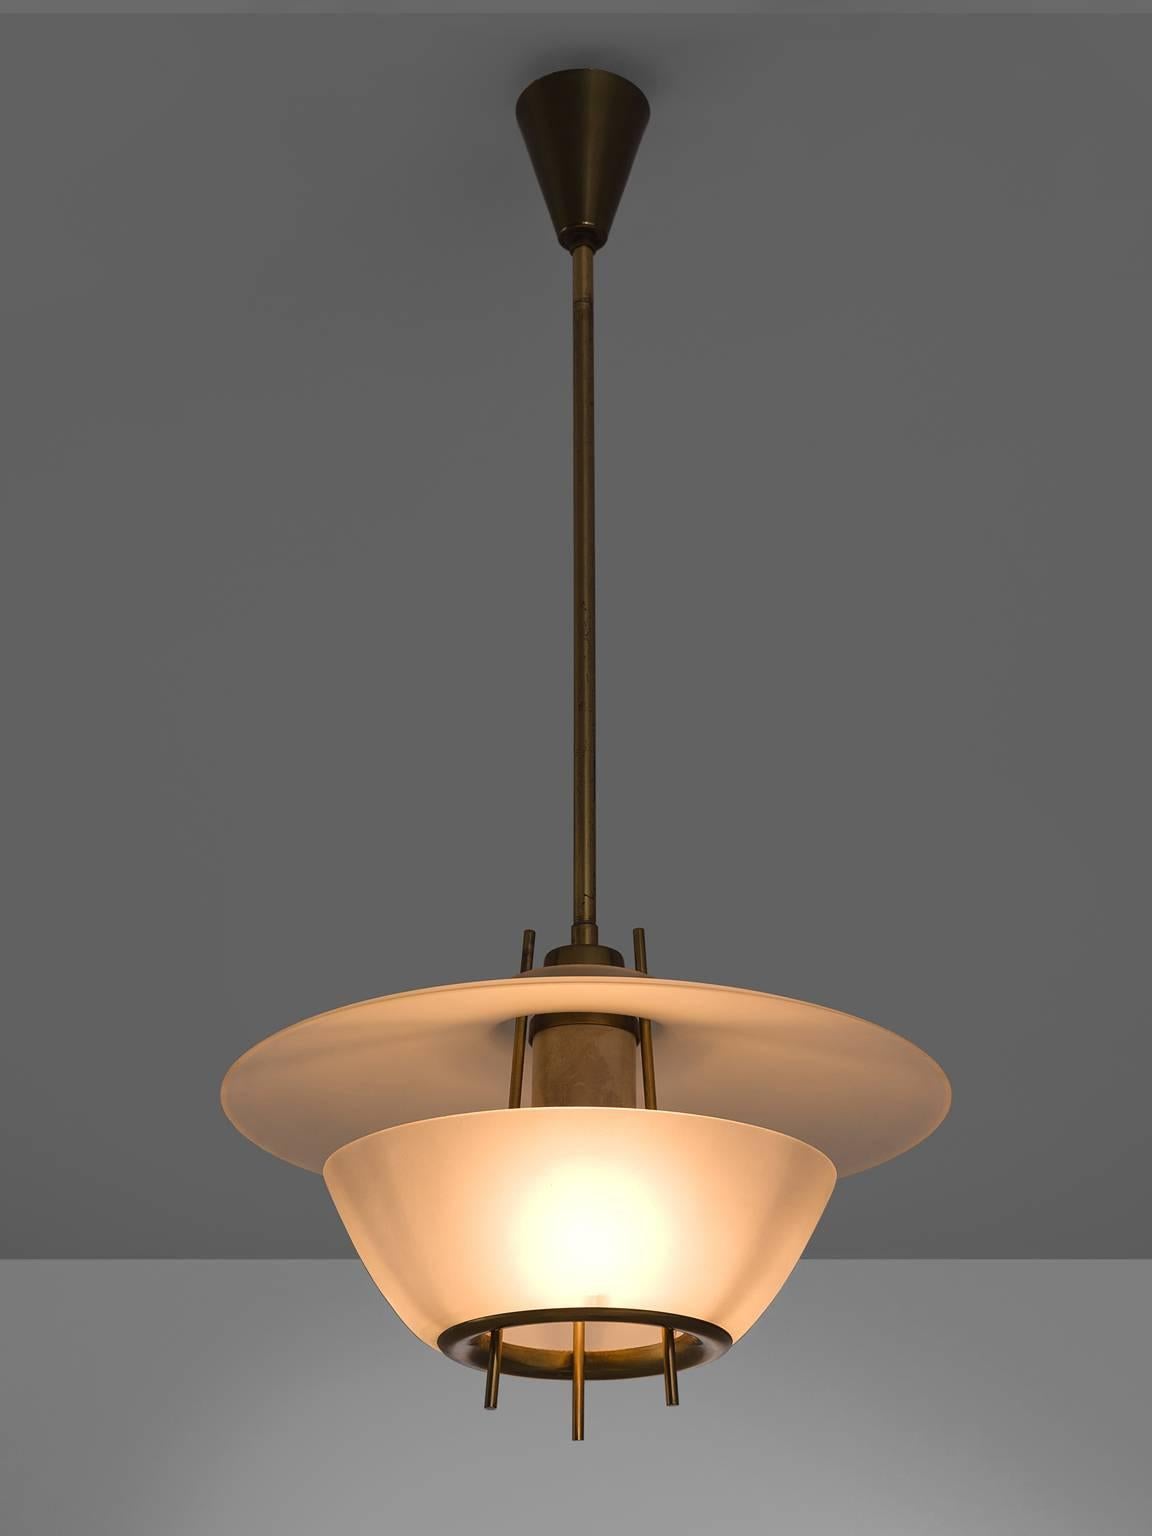 O-Luce, pendant, lucite and brass, Italy, 1960s.

This pendant has a wonderful mounting element in brass, they show the high standard of quality and detail O-Luce is known for. The elegant shades create a wonderful light partition. The pendant is